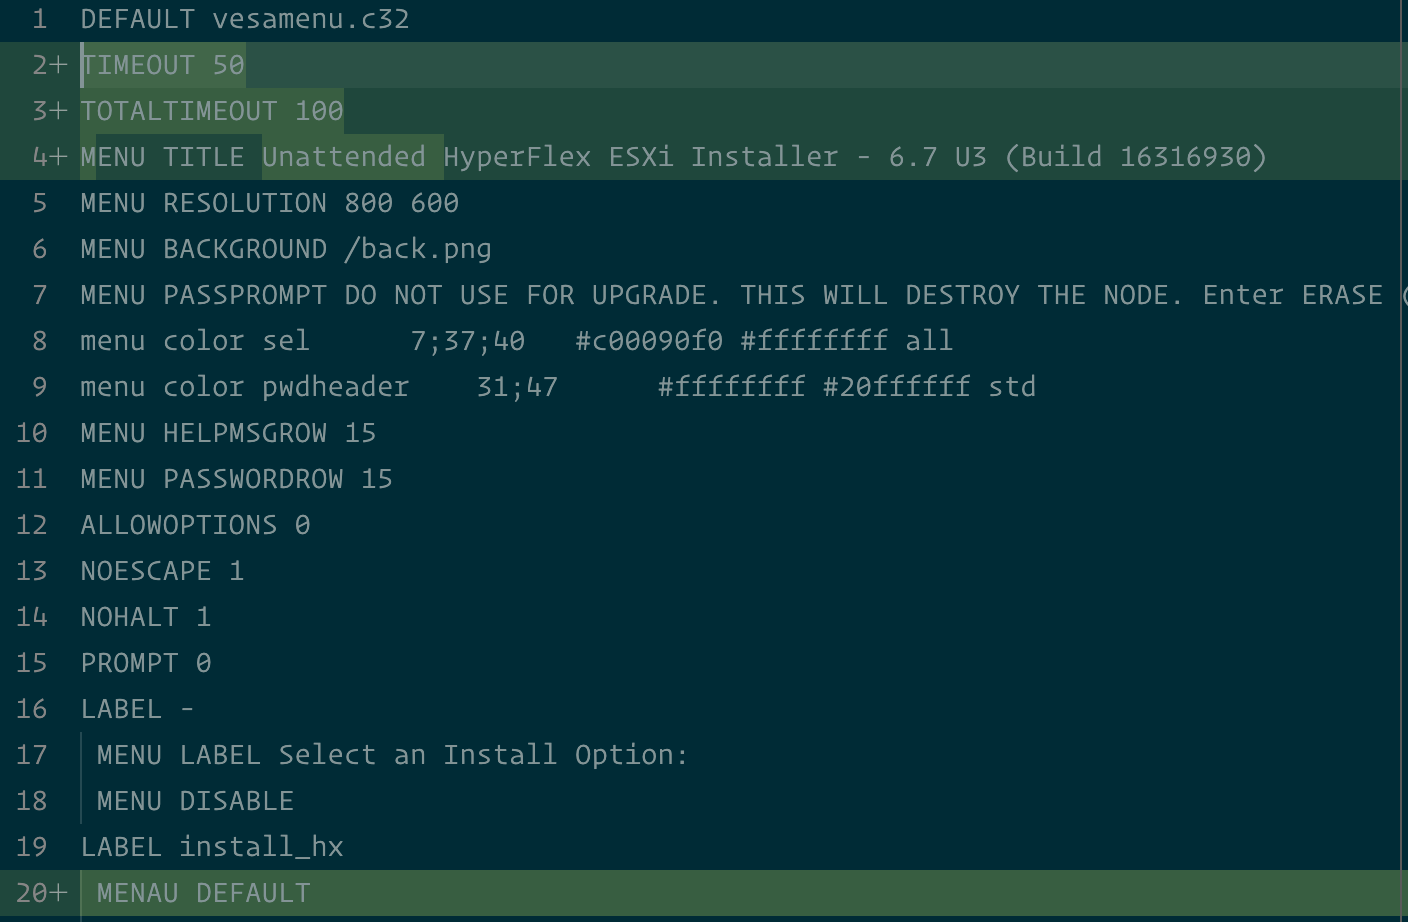 Custom ISOLINUX.CFG for unattended HX ESXi Installation